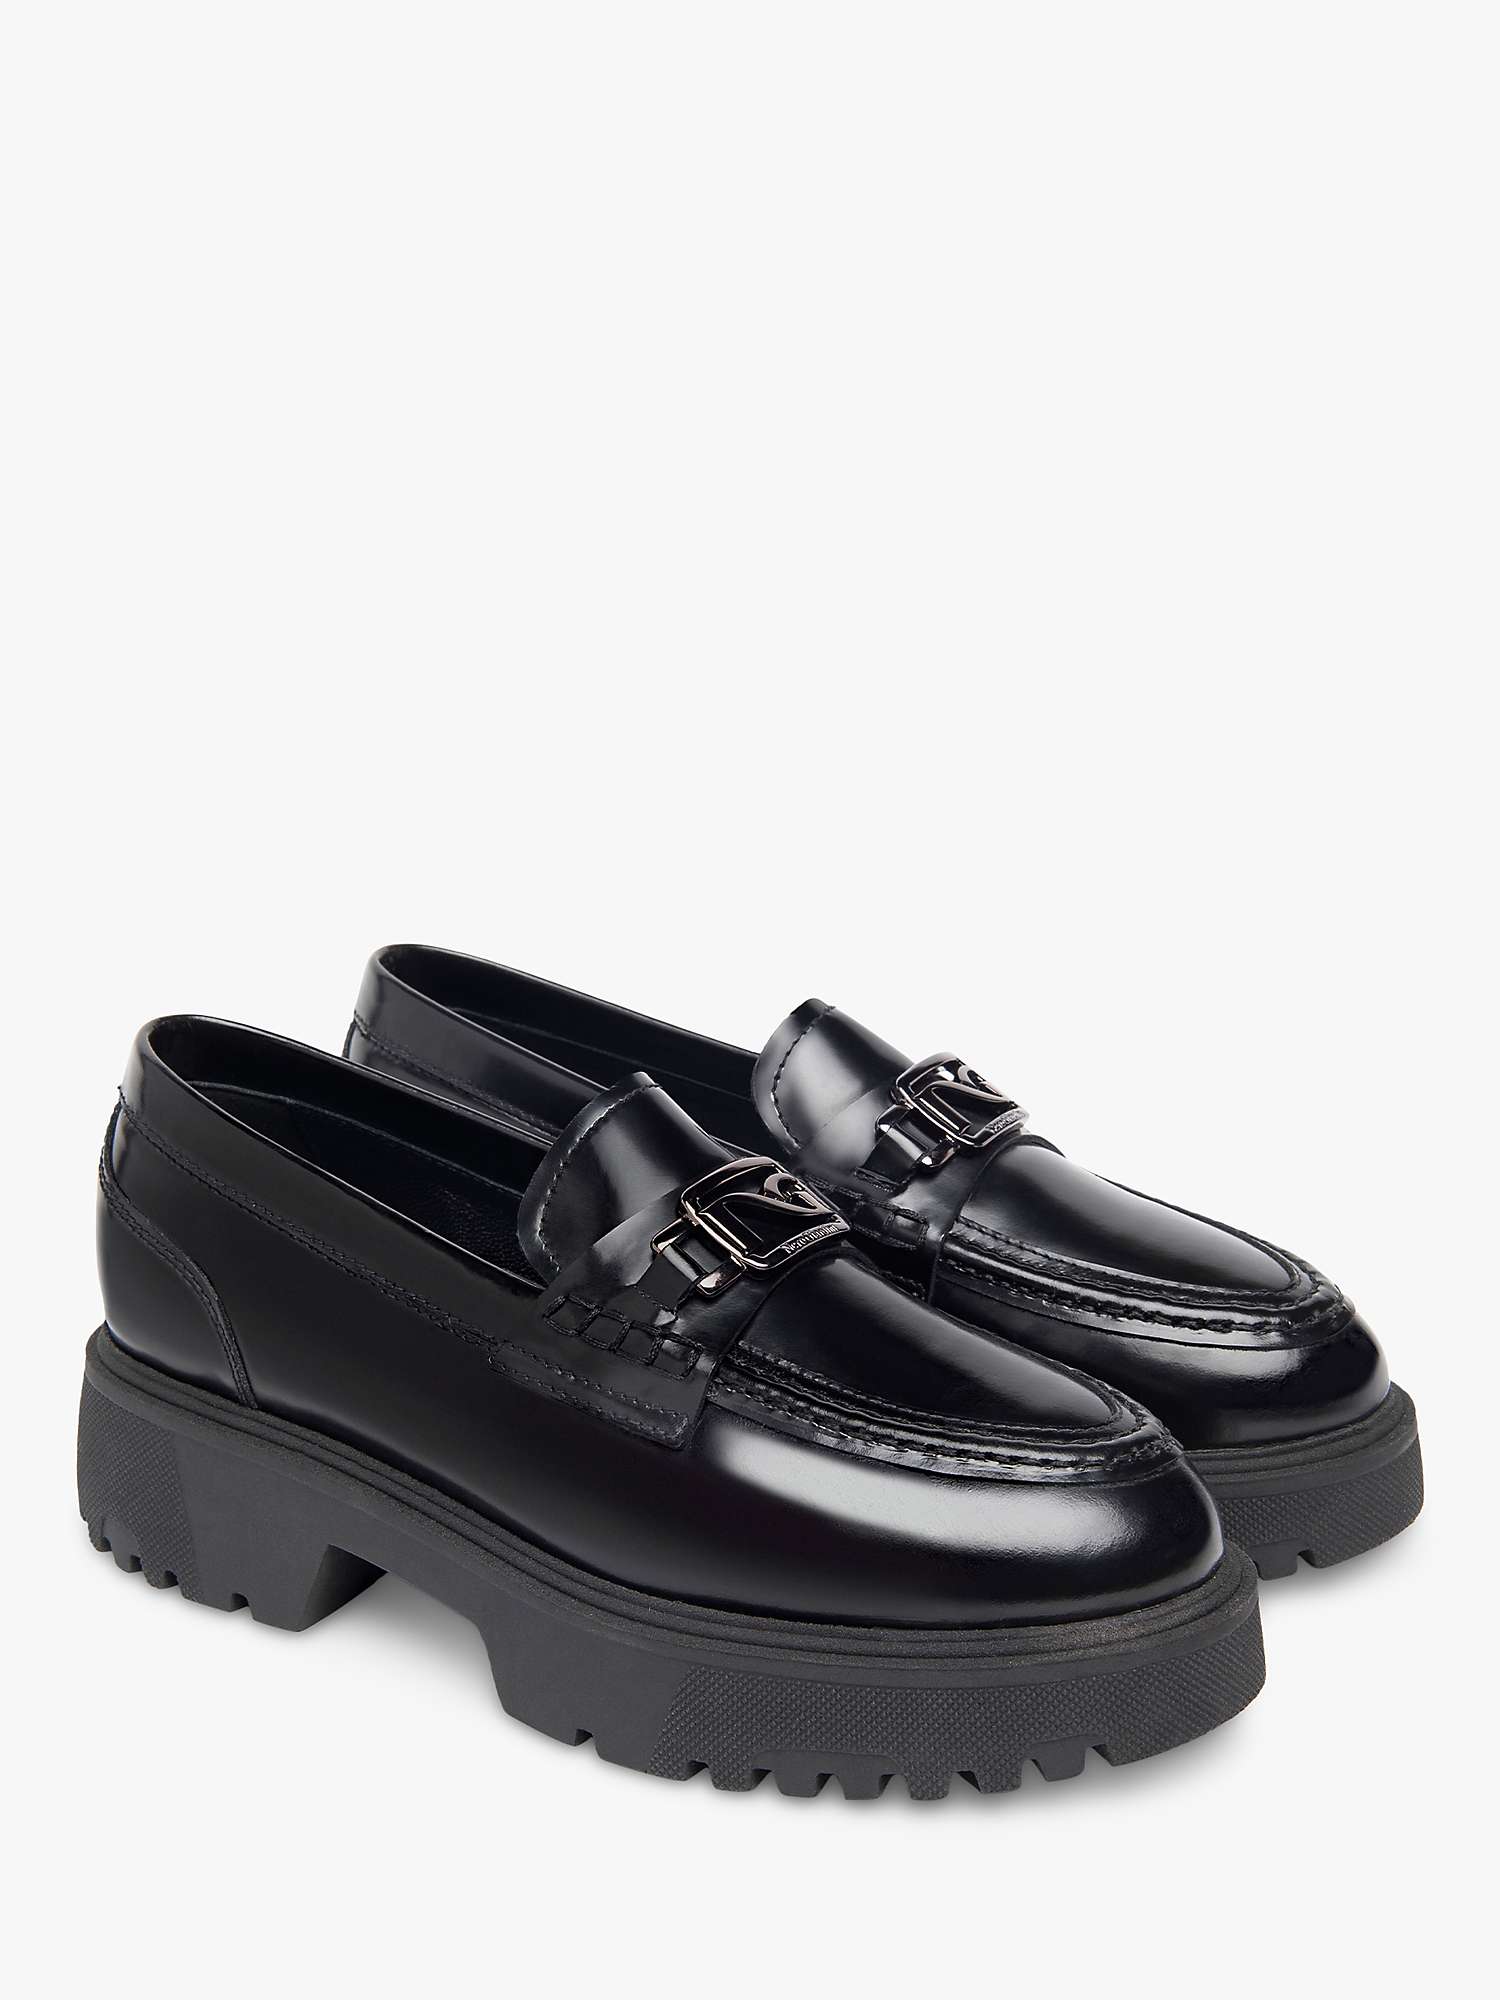 NeroGiardini Chunky Patent Leather Loafers at John Lewis & Partners